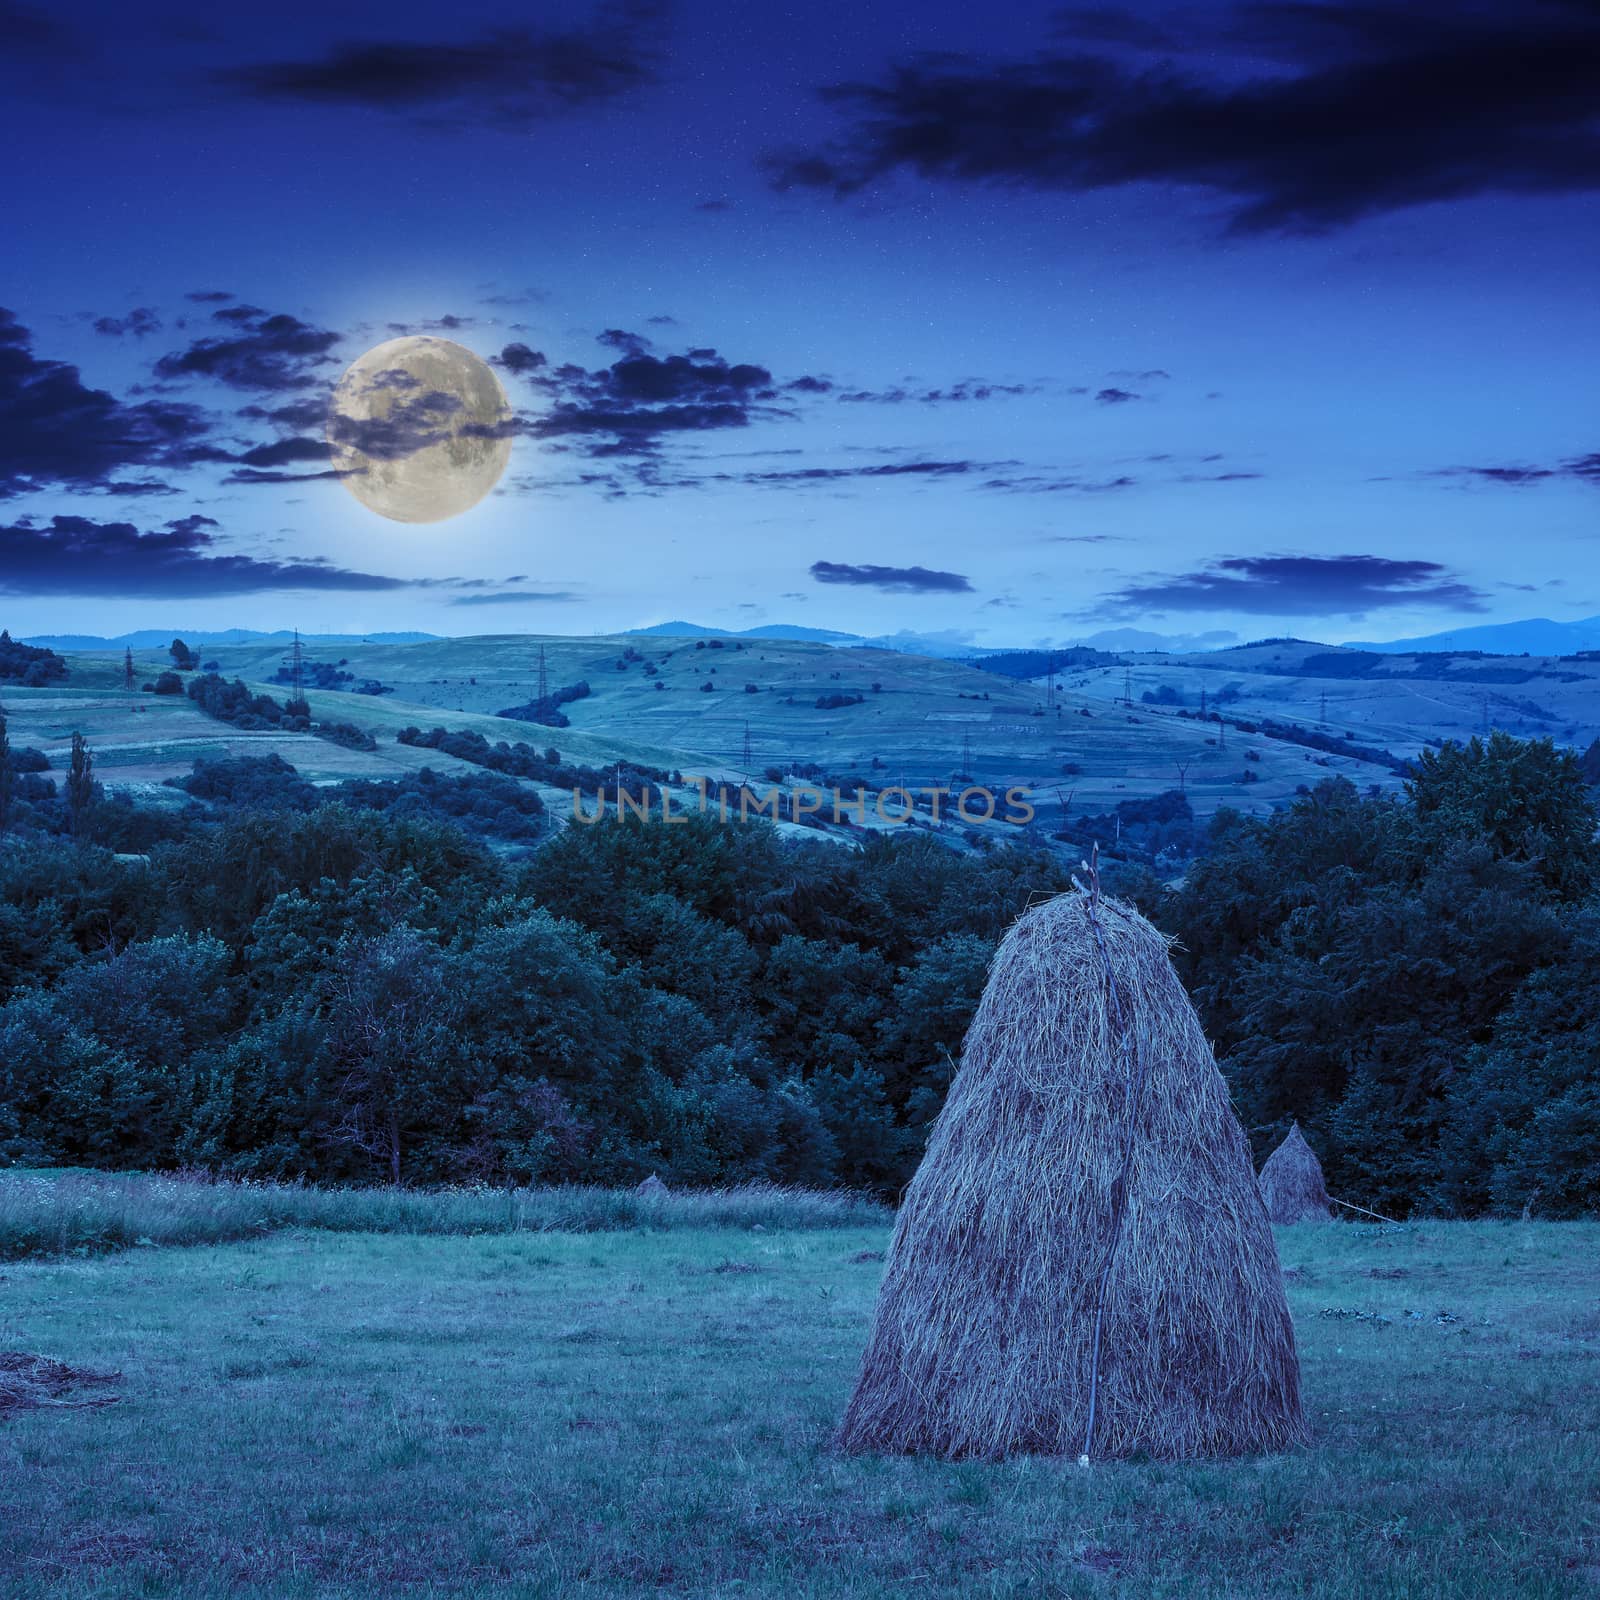 pair of haystacks and tree at mountain at night by Pellinni